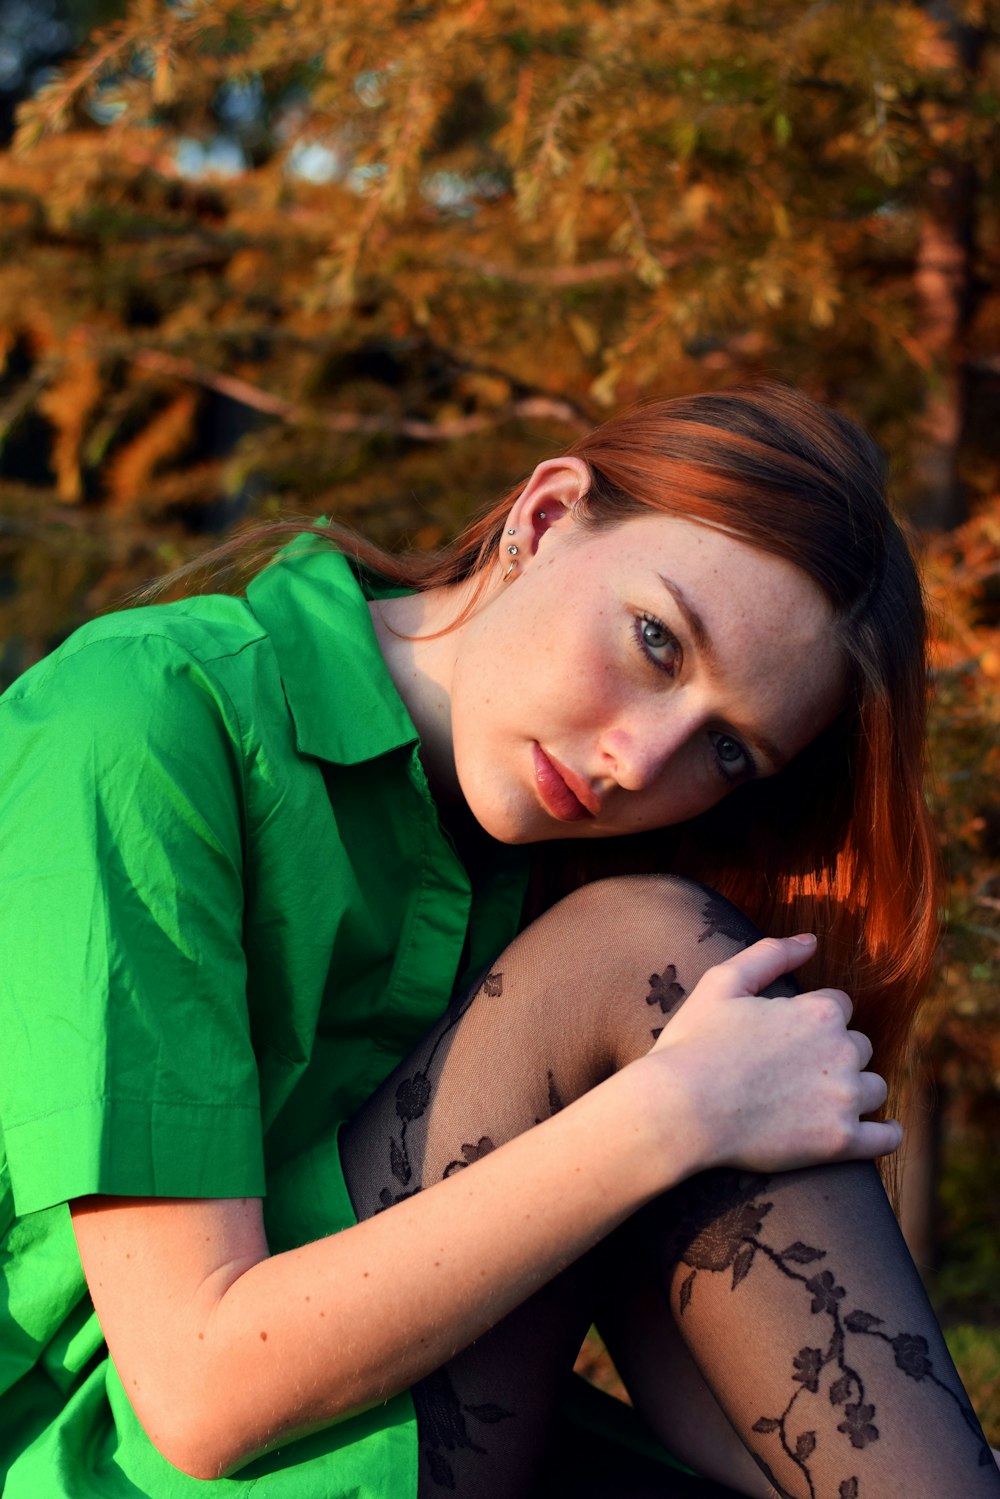 a woman with a green shirt and black stockings